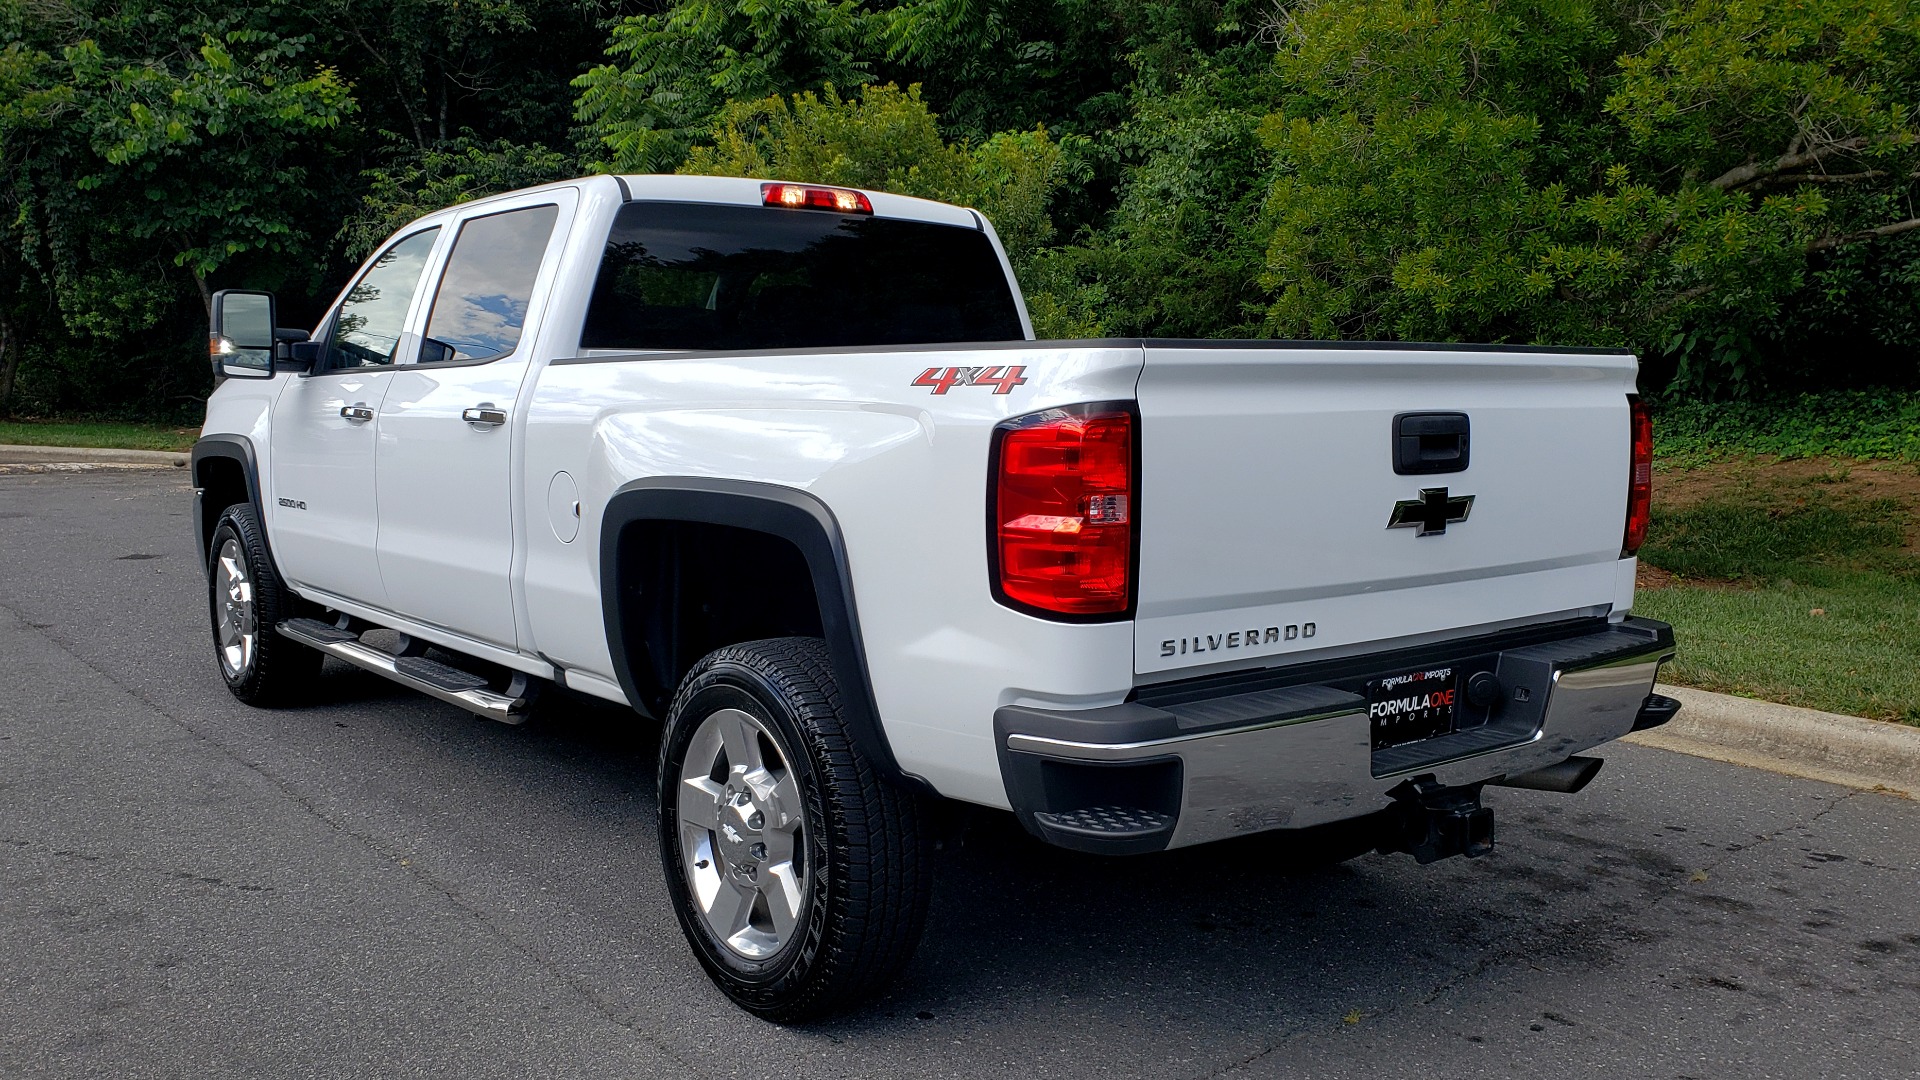 Used 2019 Chevrolet SILVERADO 2500HD WORK TRUCK / CREW CAB / 6.0L V8 / 4WD / BEDLINER for sale Sold at Formula Imports in Charlotte NC 28227 3